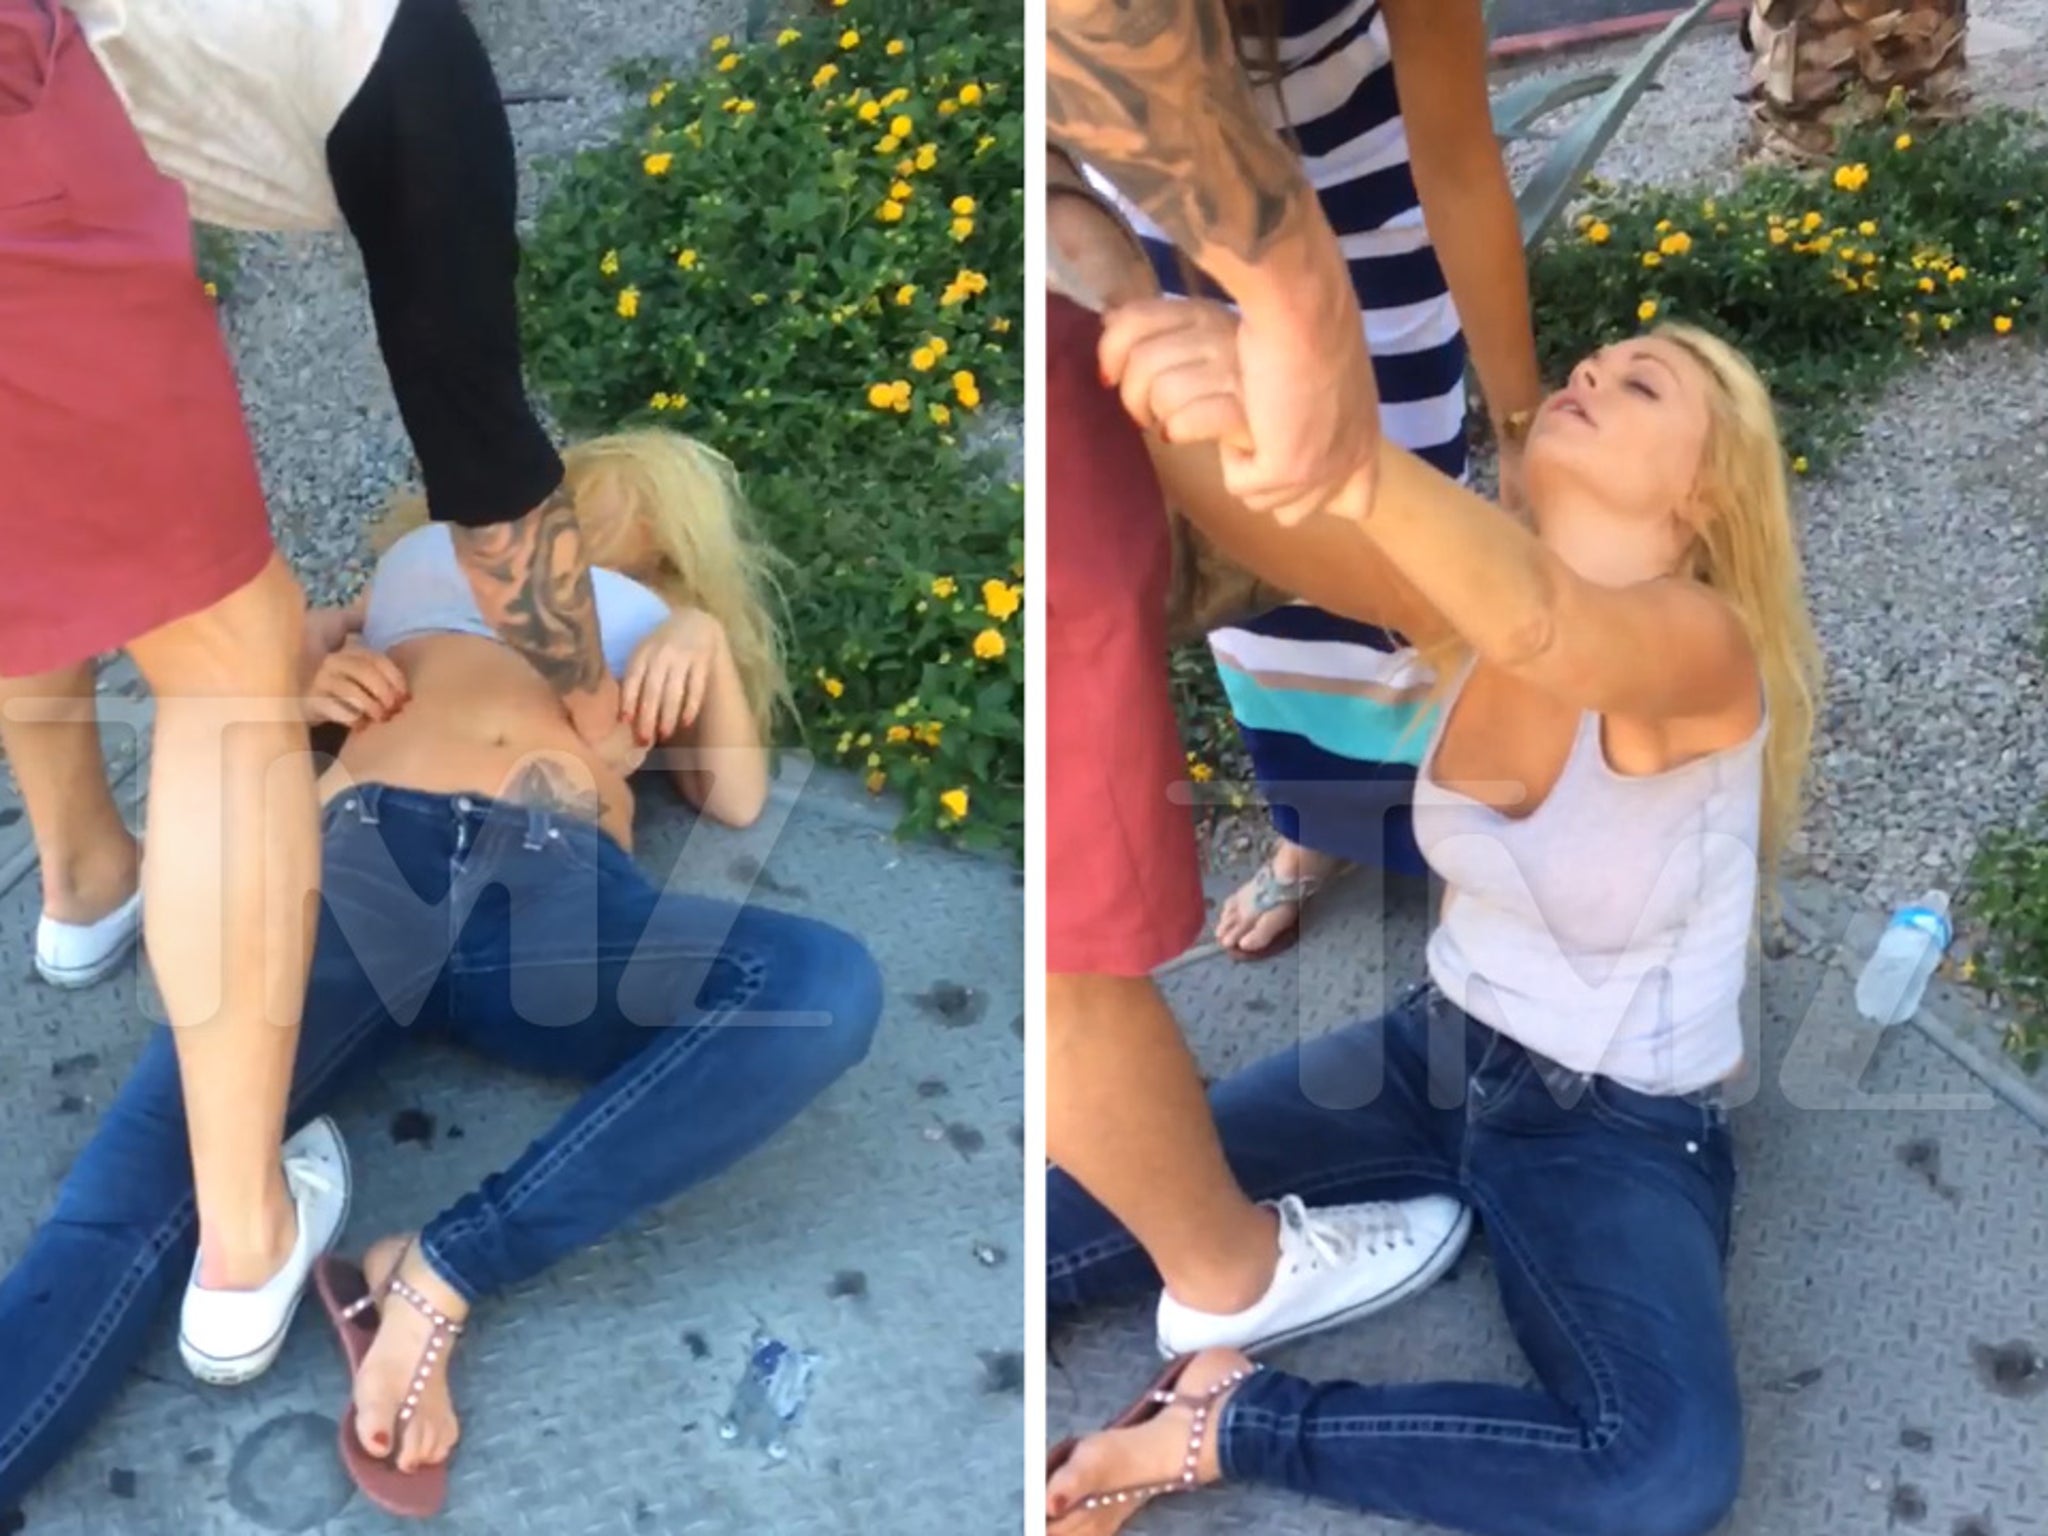 Passed Out Drunk - Porn Star Jesse Jane -- Passed OUT COLD On the Vegas Strip! (VIDEO)